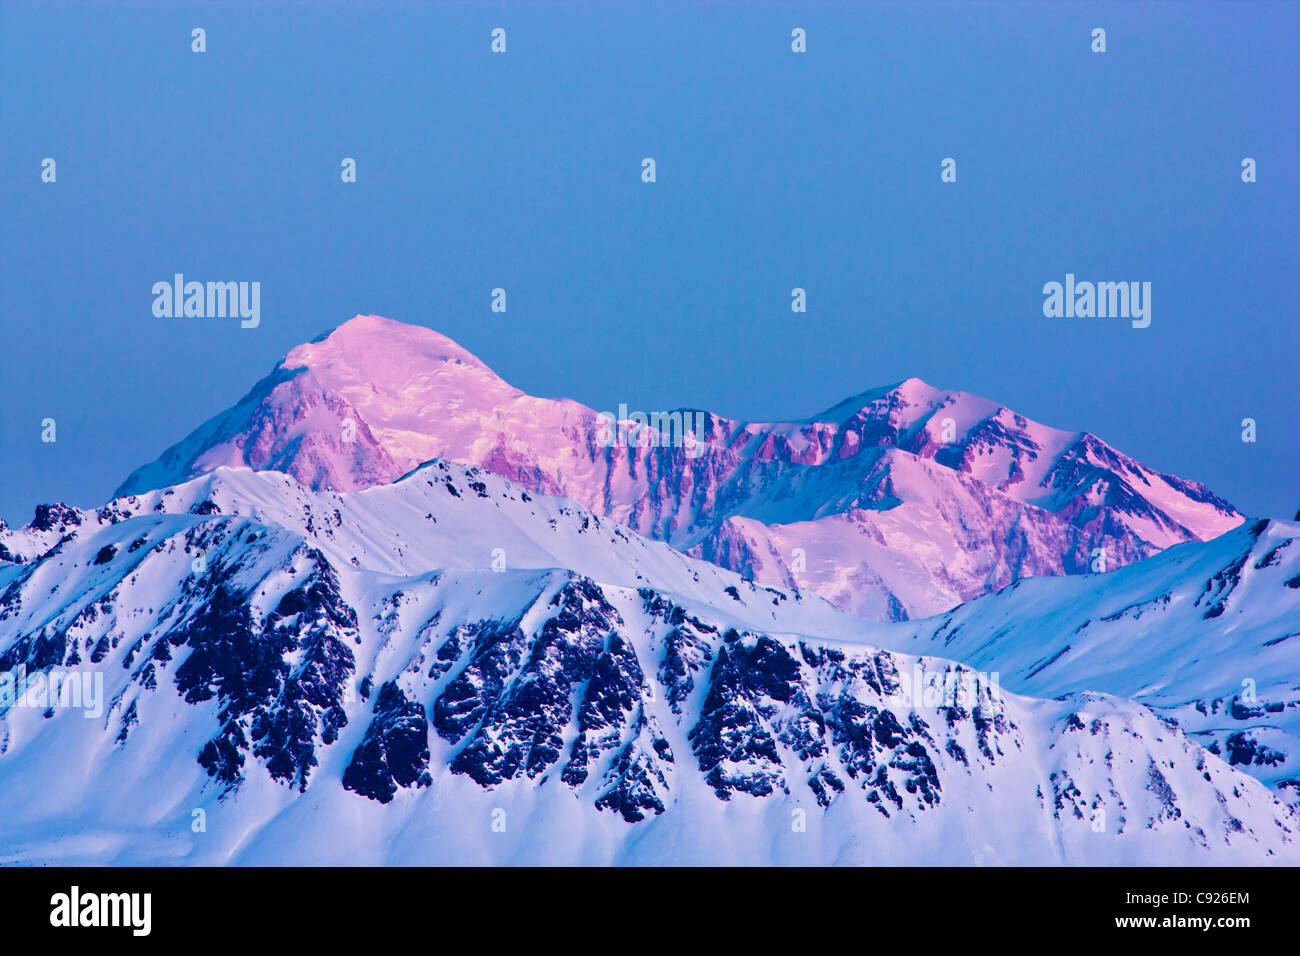 View of dawn alpenglow on the North and South summits of Mount McKinley as seen from the Denali State Park Viewpoint, Alaska Stock Photo